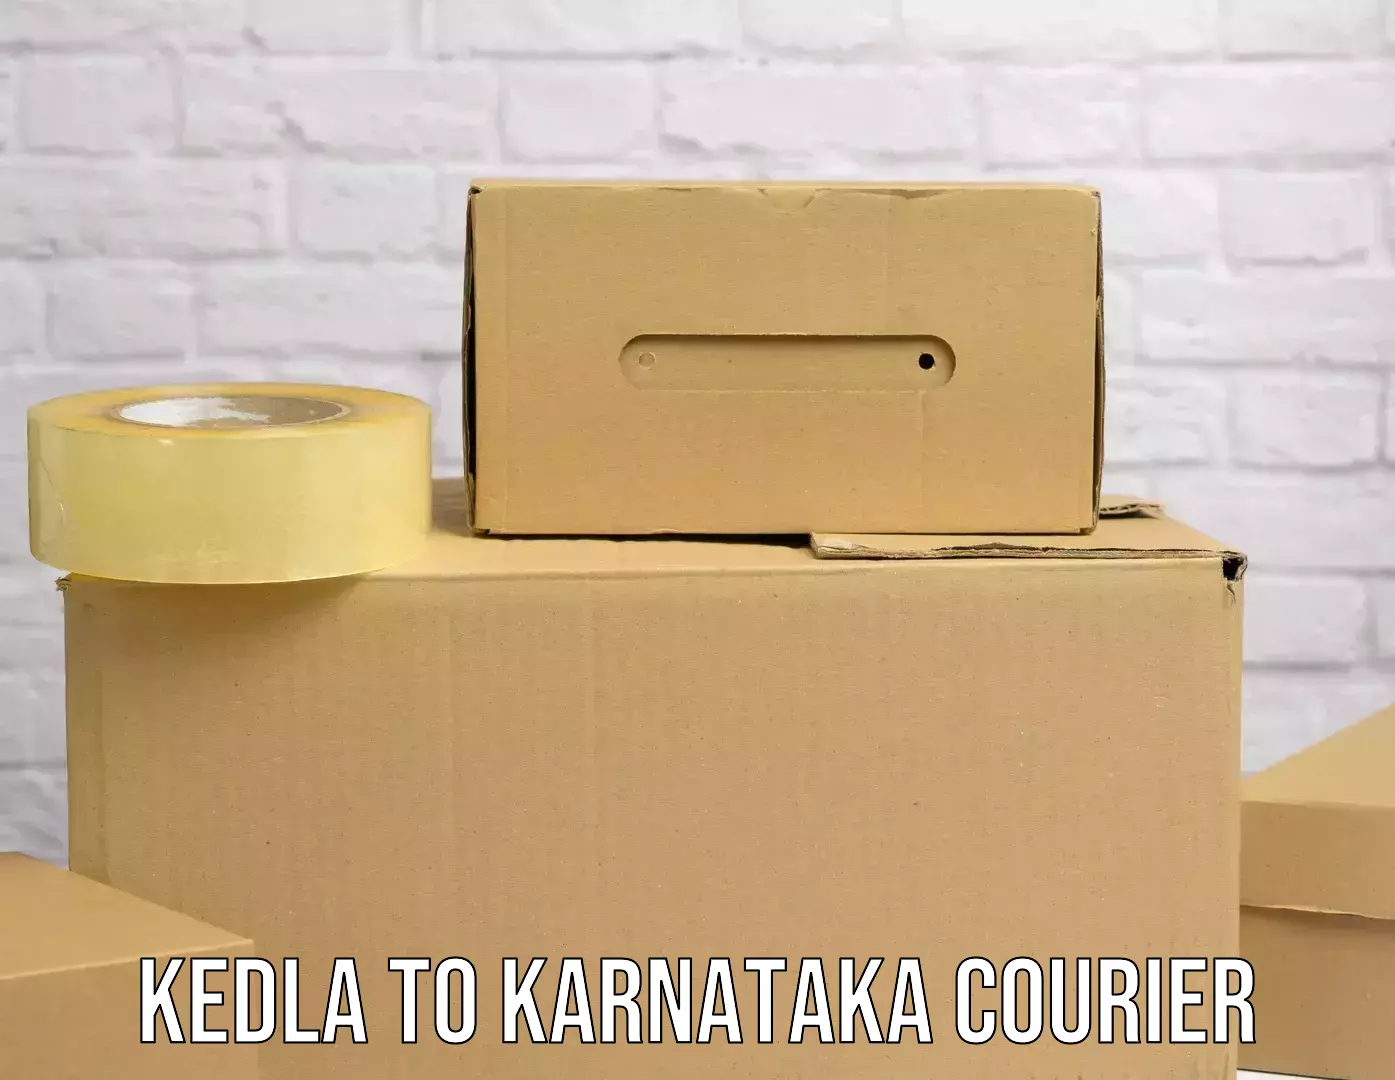 Pharmaceutical courier Kedla to Dharwad